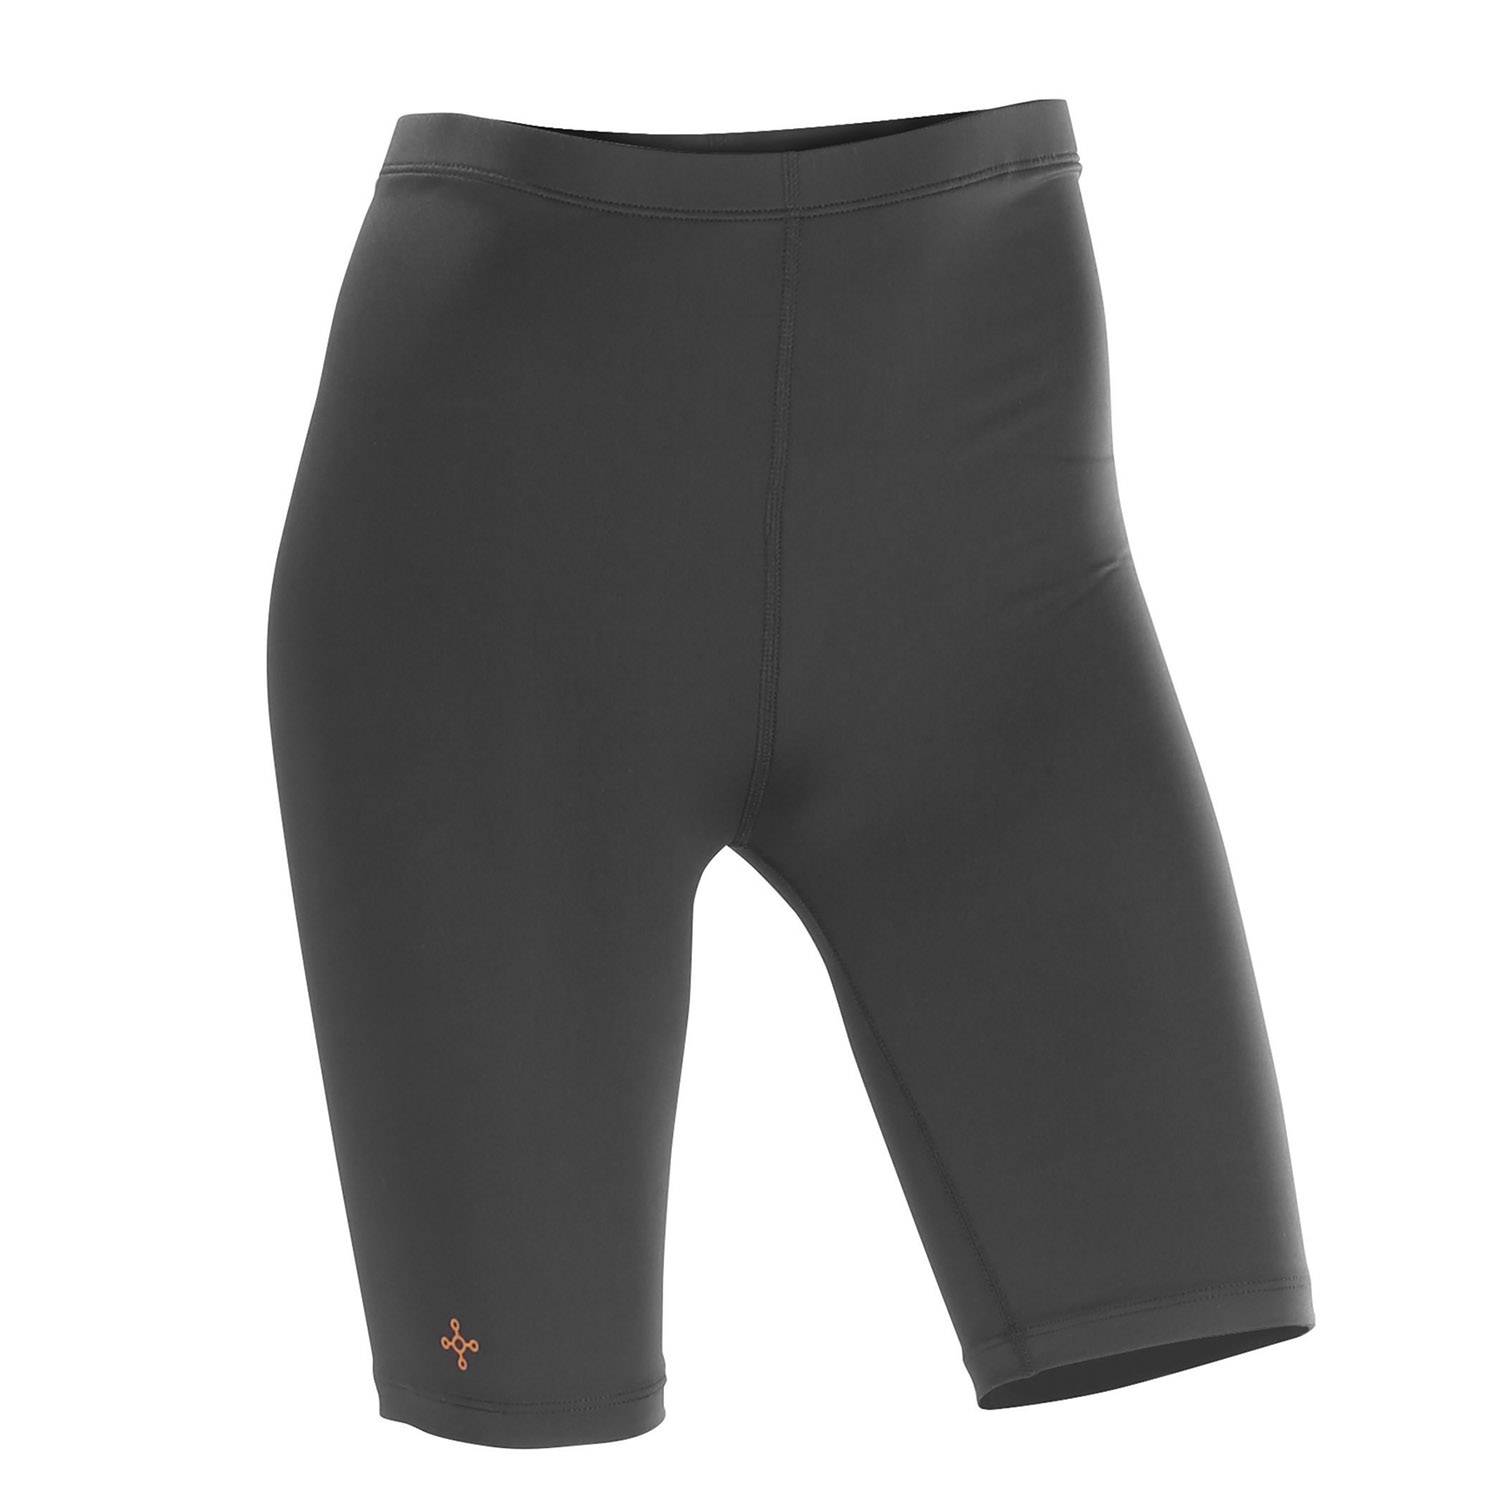 Tommie Copper Women's Journey Recovery Compression Shorts